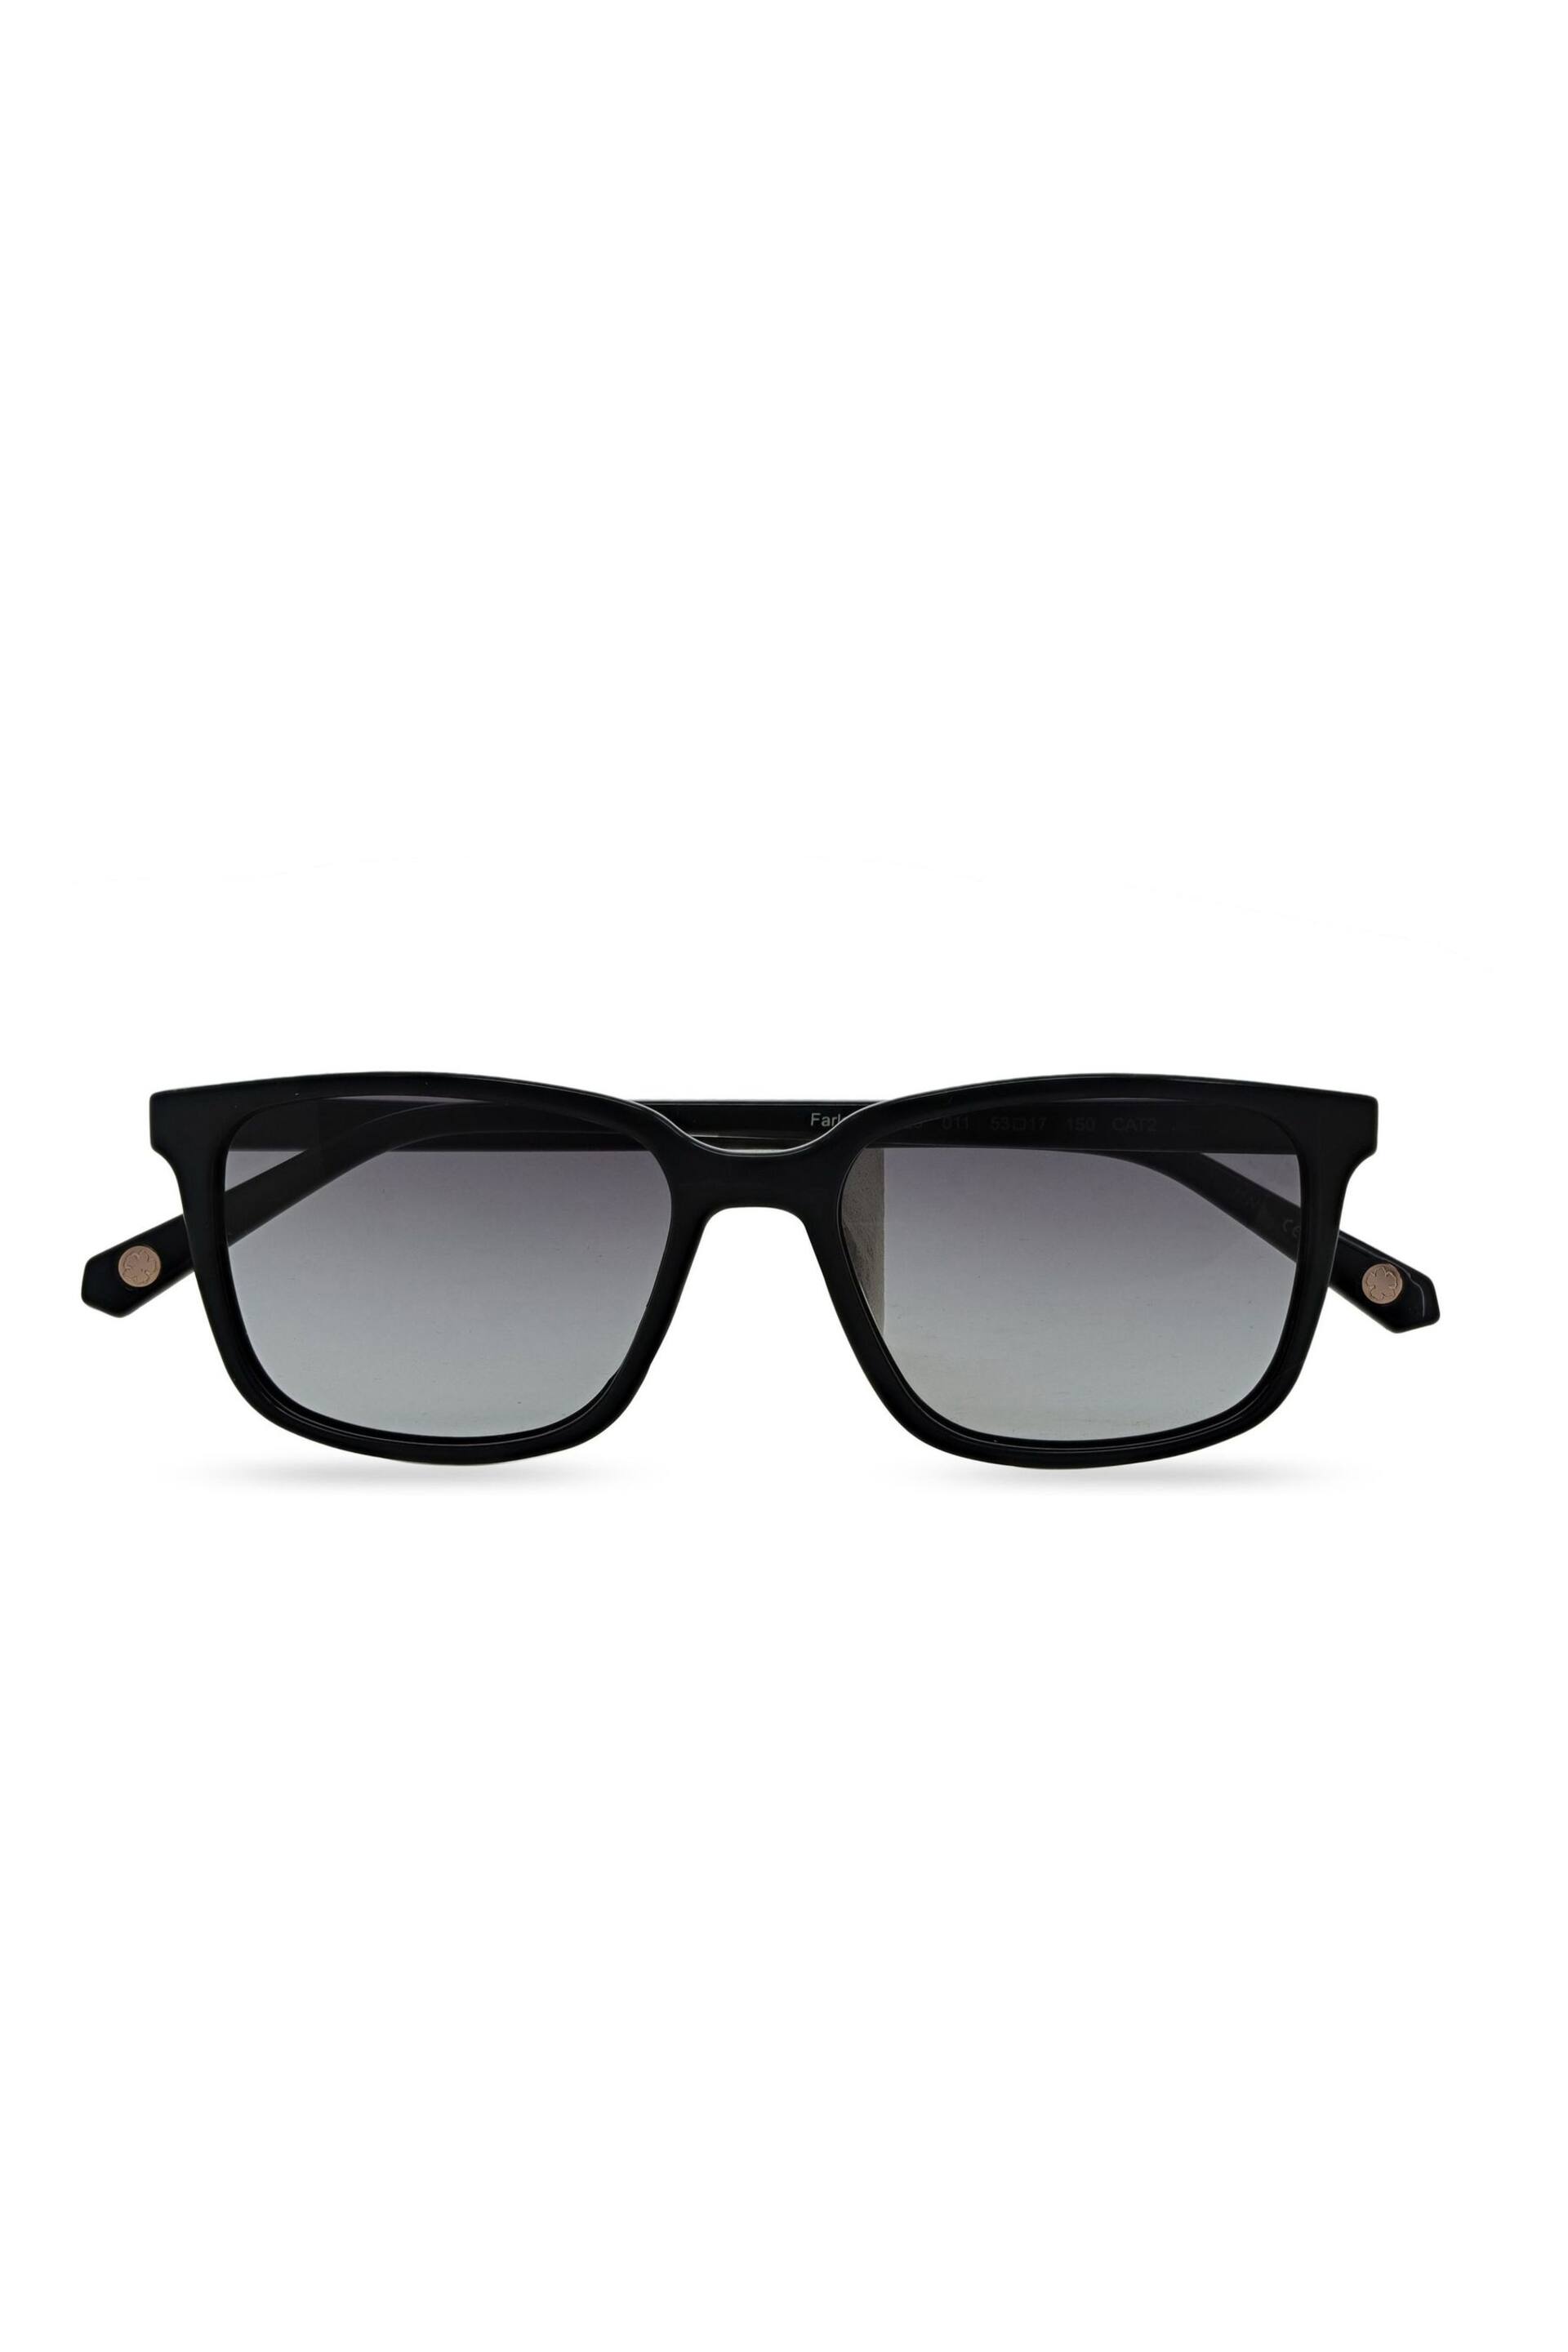 Ted Baker Black Classic Mens Sunglasses with Contrast Temples - Image 2 of 5